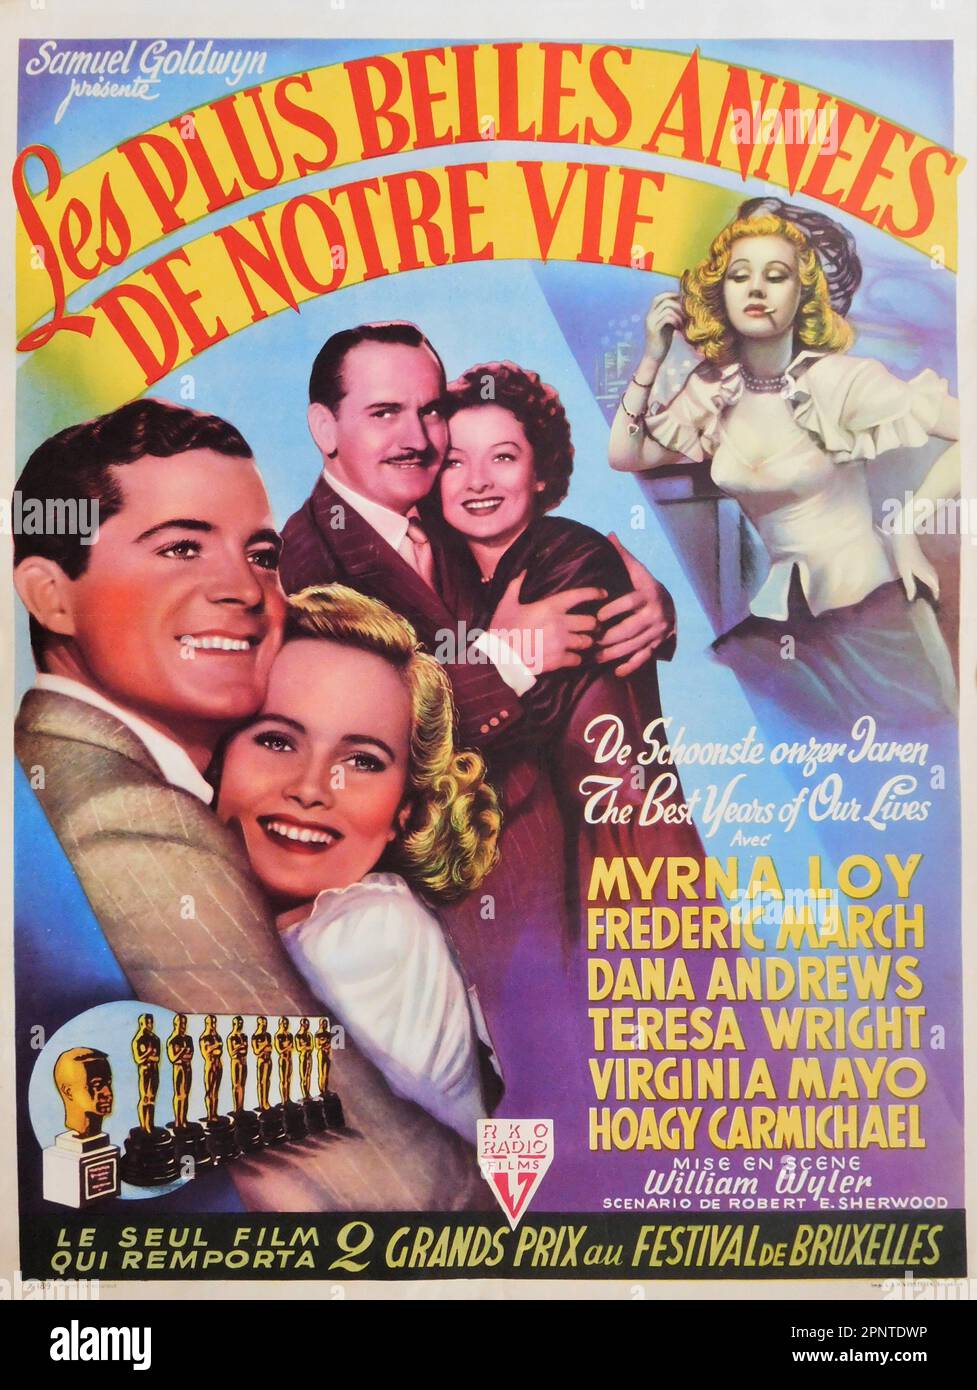 FREDRIC MARCH MYRNA LOY DANA ANDREWS TERESA WRIGHT and VIRGINIA MAYO in THE BEST YEARS OF OUR LIVES / LES PLUS BELLES ANNEES DE NOTRE VIE 1946 director WILLIAM WYLER novel MacKinlay Kantor screenplay Robert E. Sherwood music Hugo Friedhofer Samuel Goldwyn Productions / RKO Radio Pictures Stock Photo